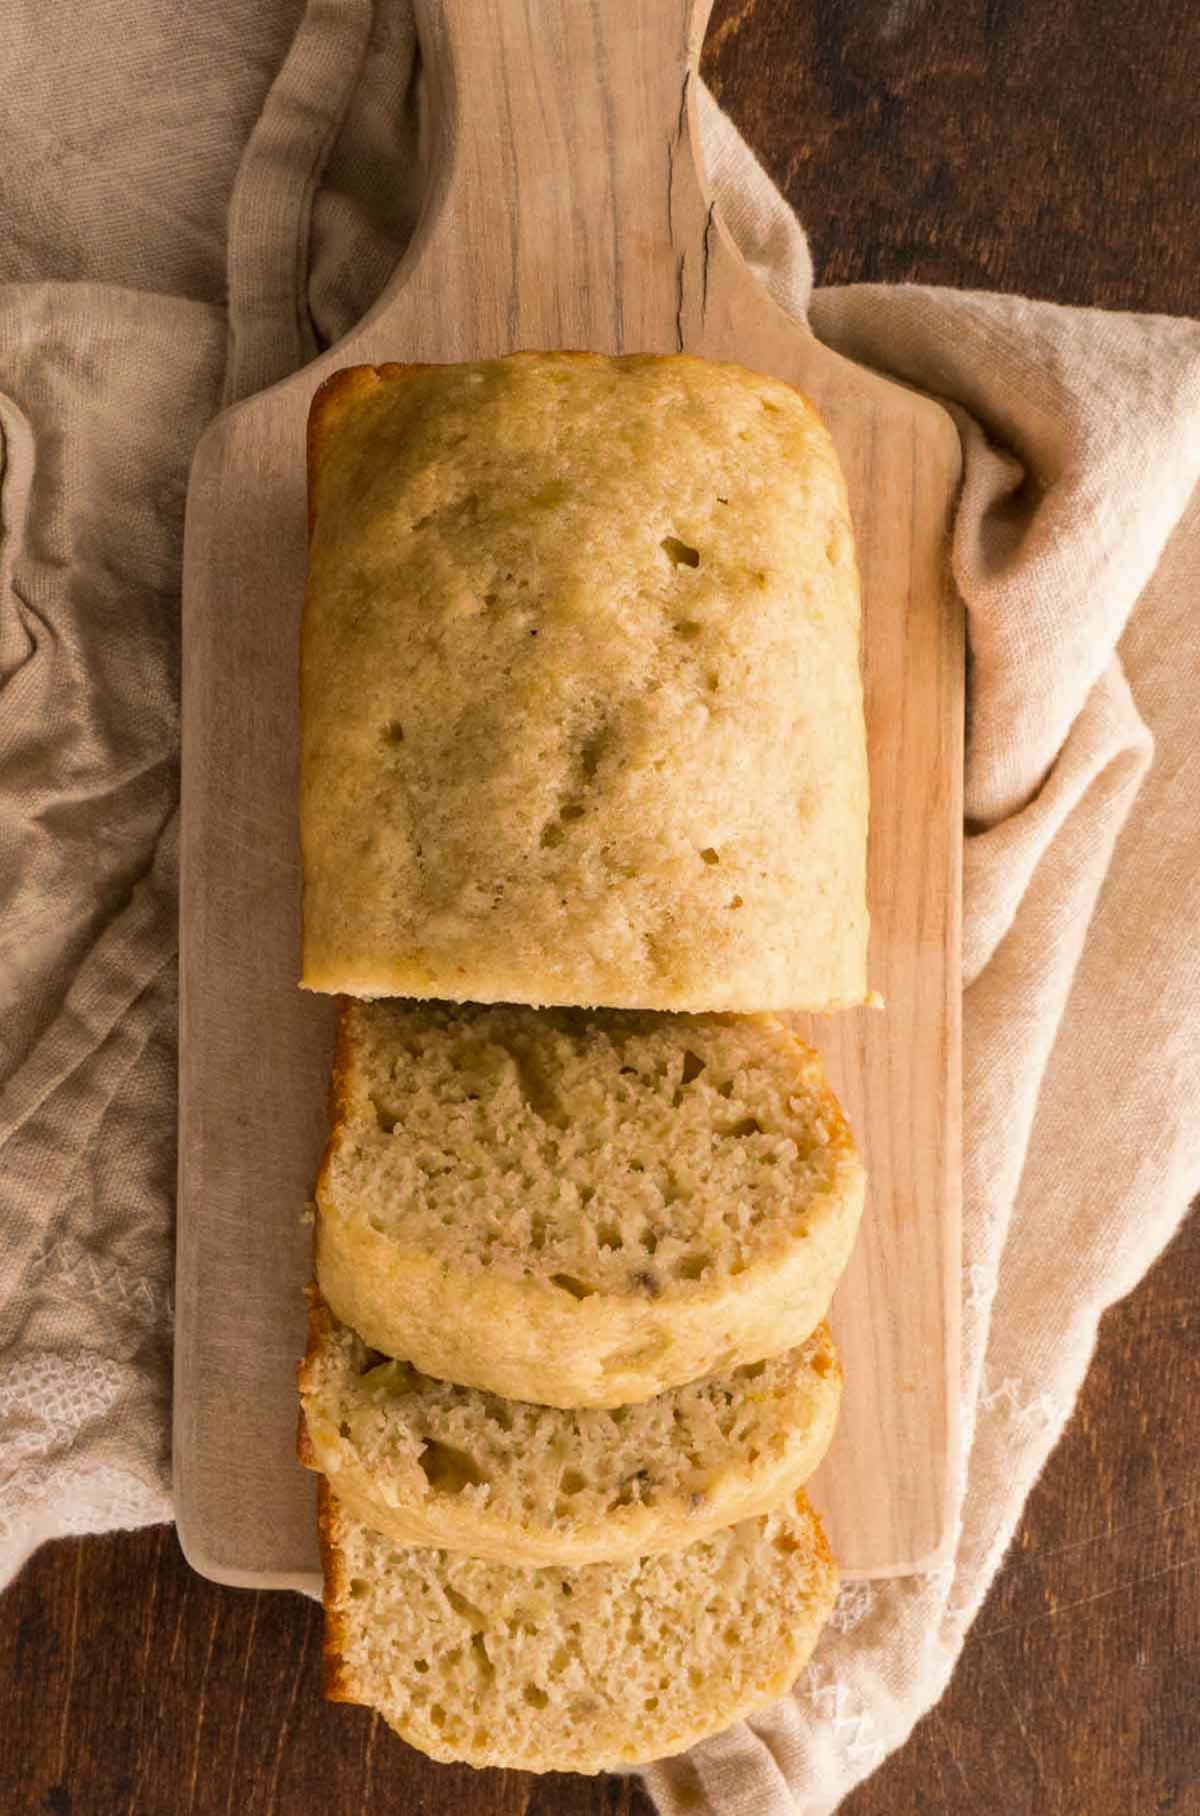 Sliced banana bread on a cutting board that is sitting on a kitchen towel.